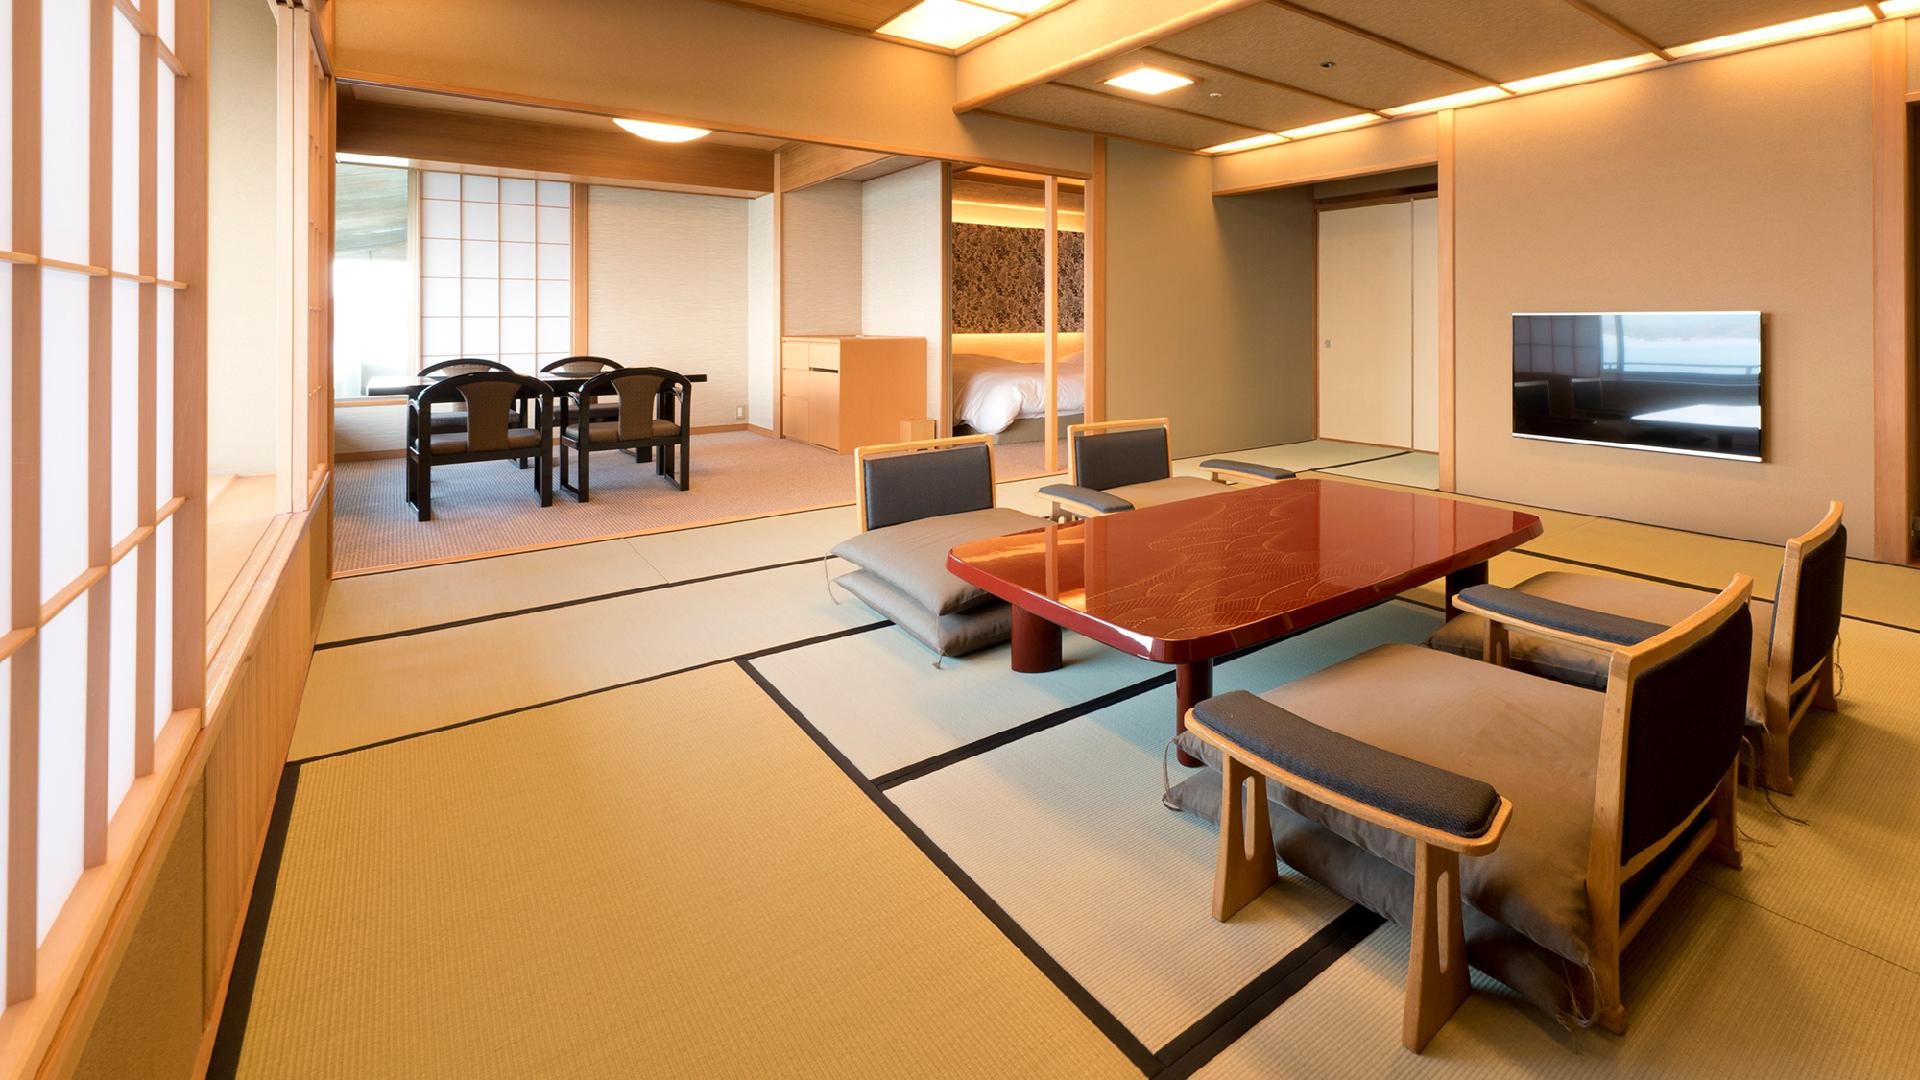 An example of a guest room on the special floor of Yuzuki Hana